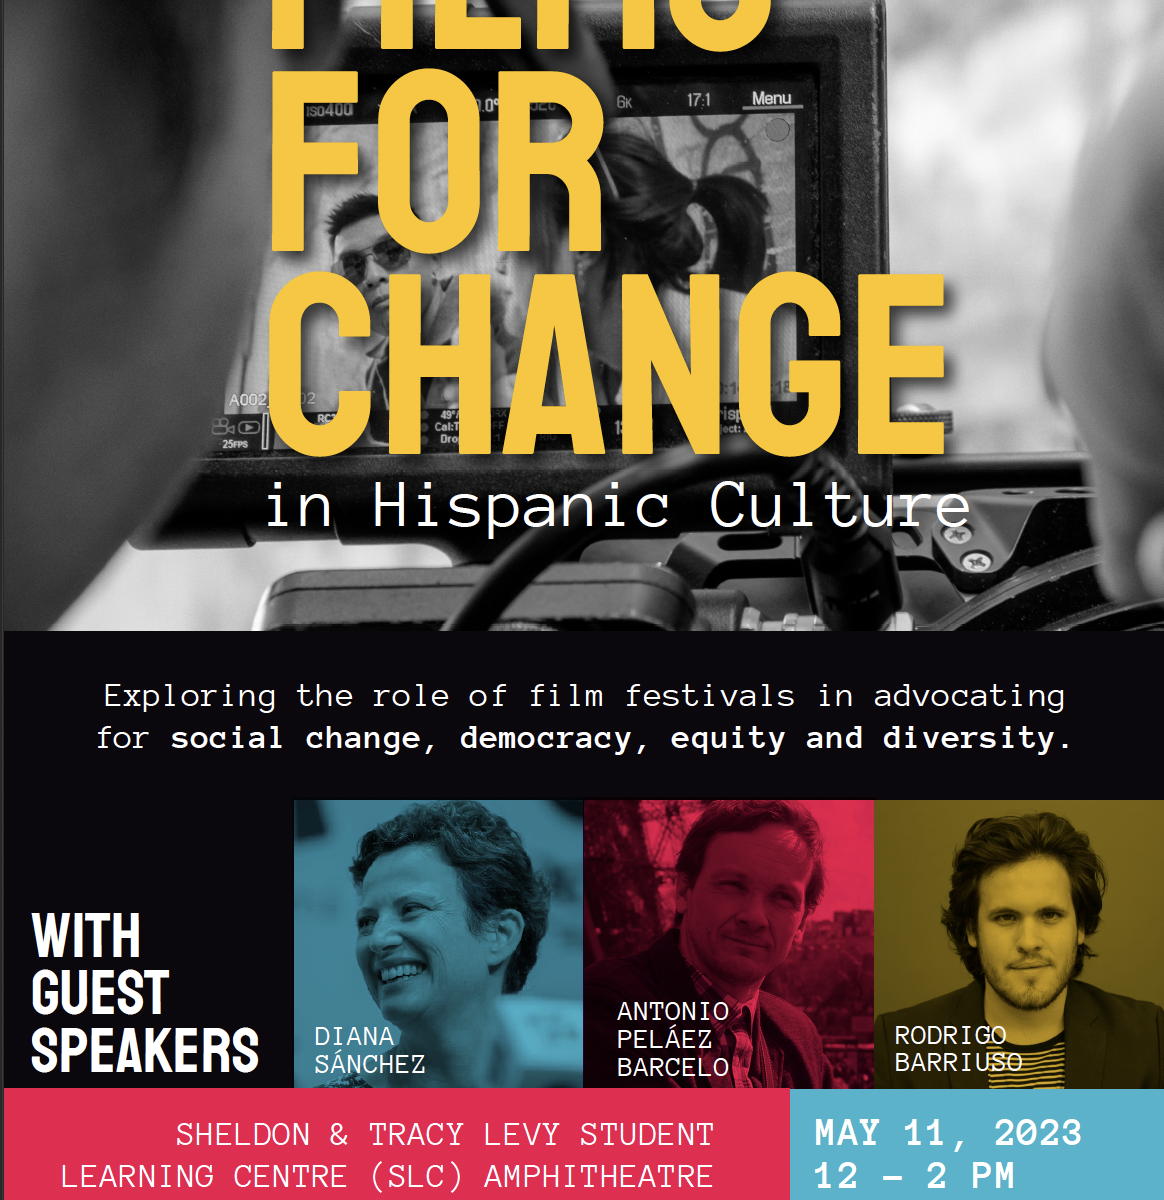 Poster for the course Films for Change in Hispanic Culture, with guest speakers Diana Sanchez, Rodrigo Barrios and Antonio Peláez Barceló.